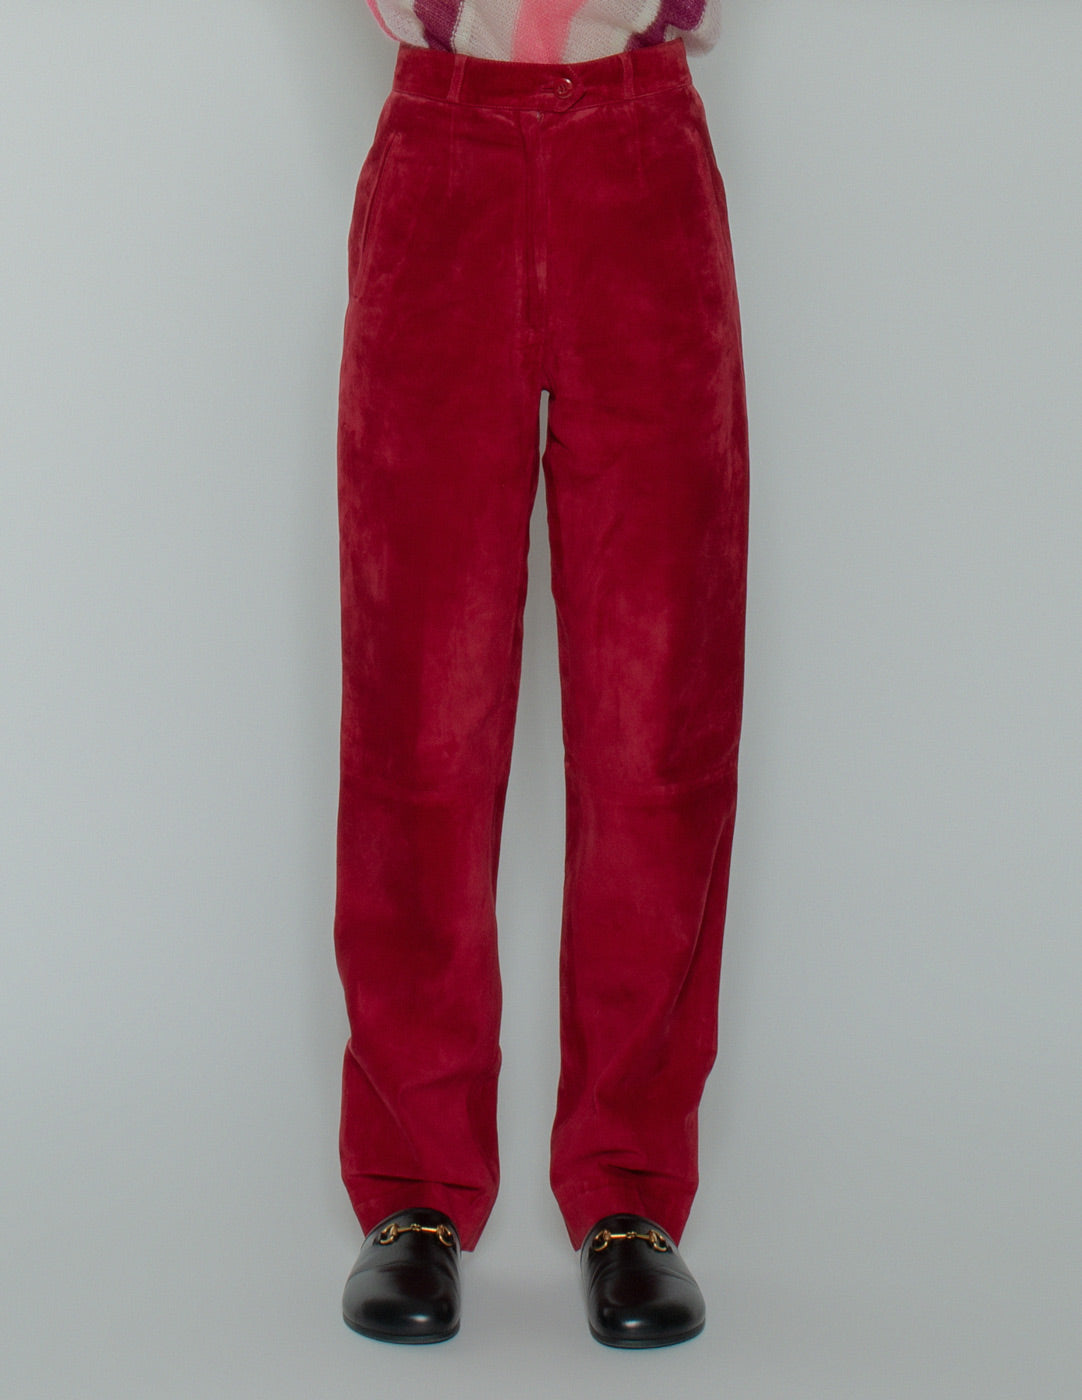 Gucci vintage red high waisted suede trousers front detail